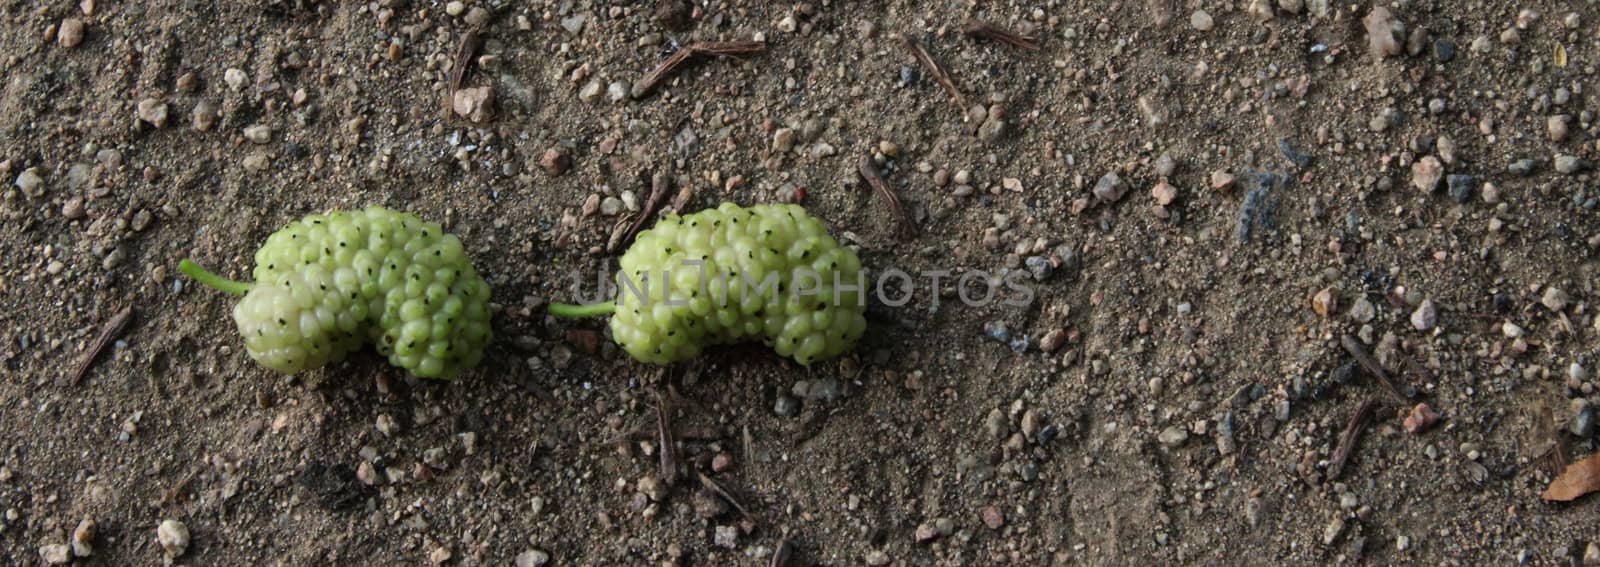 Banner. Two green unripe fruits of white mulberry on the ground. Morus alba, white mulberry.